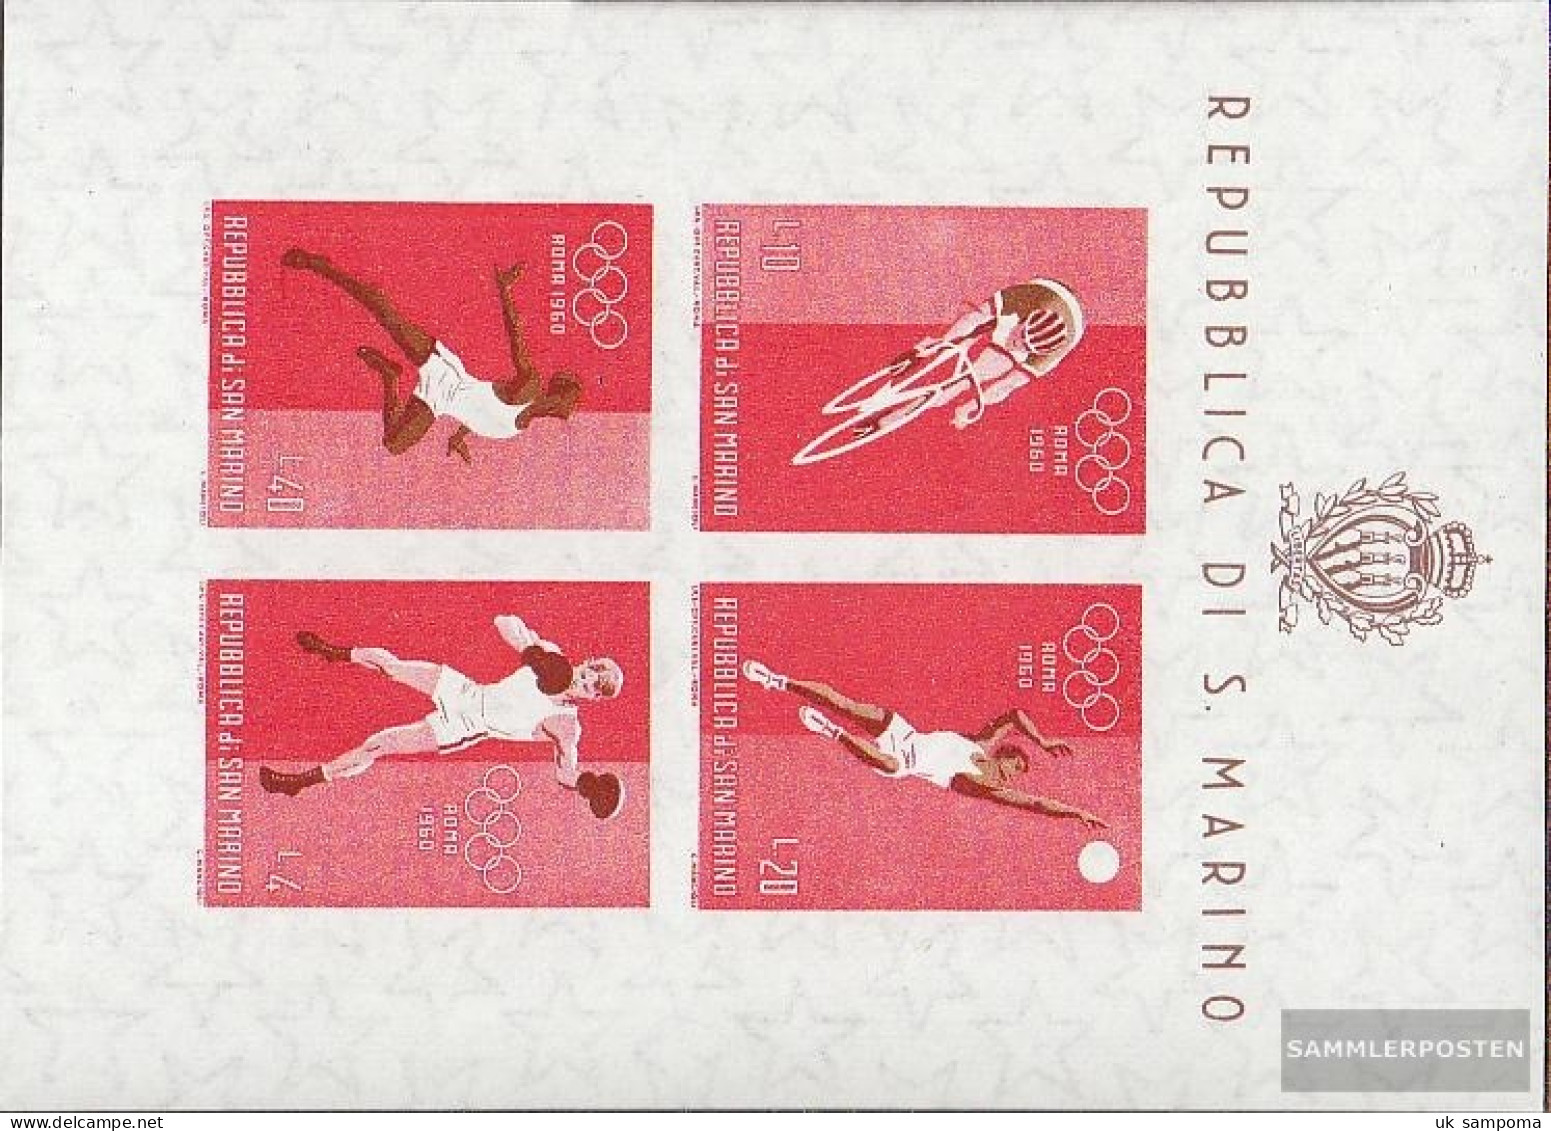 San Marino Block6 (complete Issue) Unmounted Mint / Never Hinged 1960 Summer Olympics - Blocs-feuillets